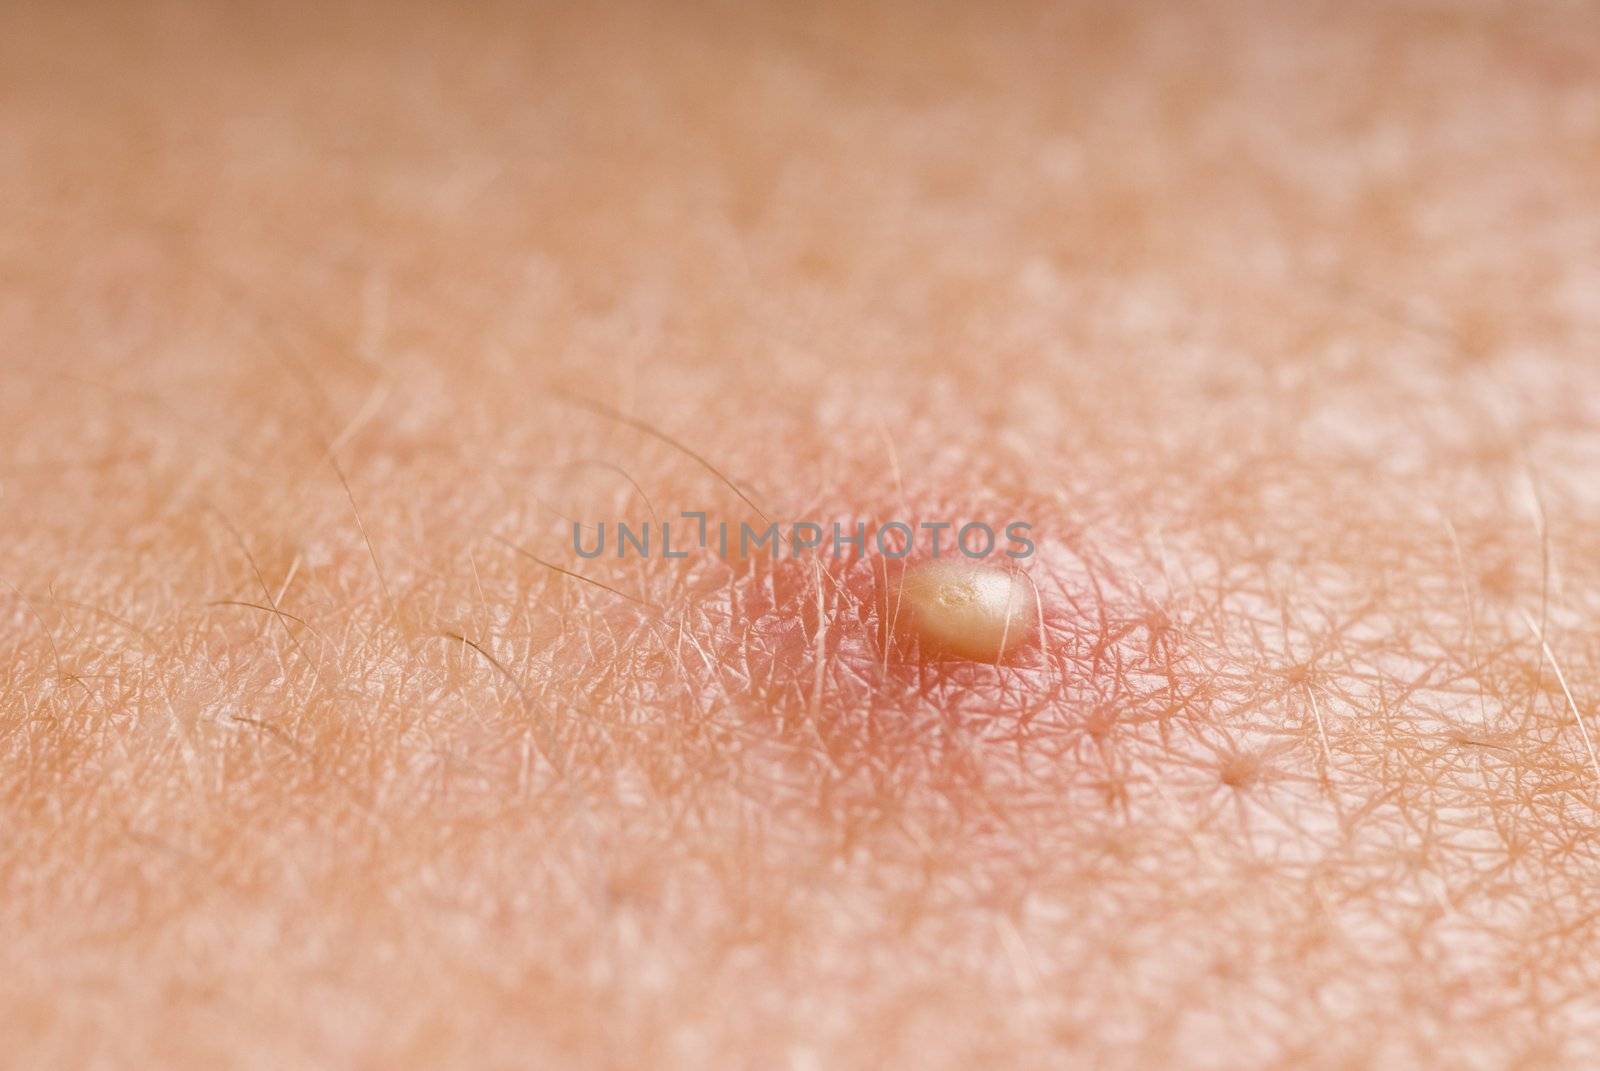 white head pimple by stockarch